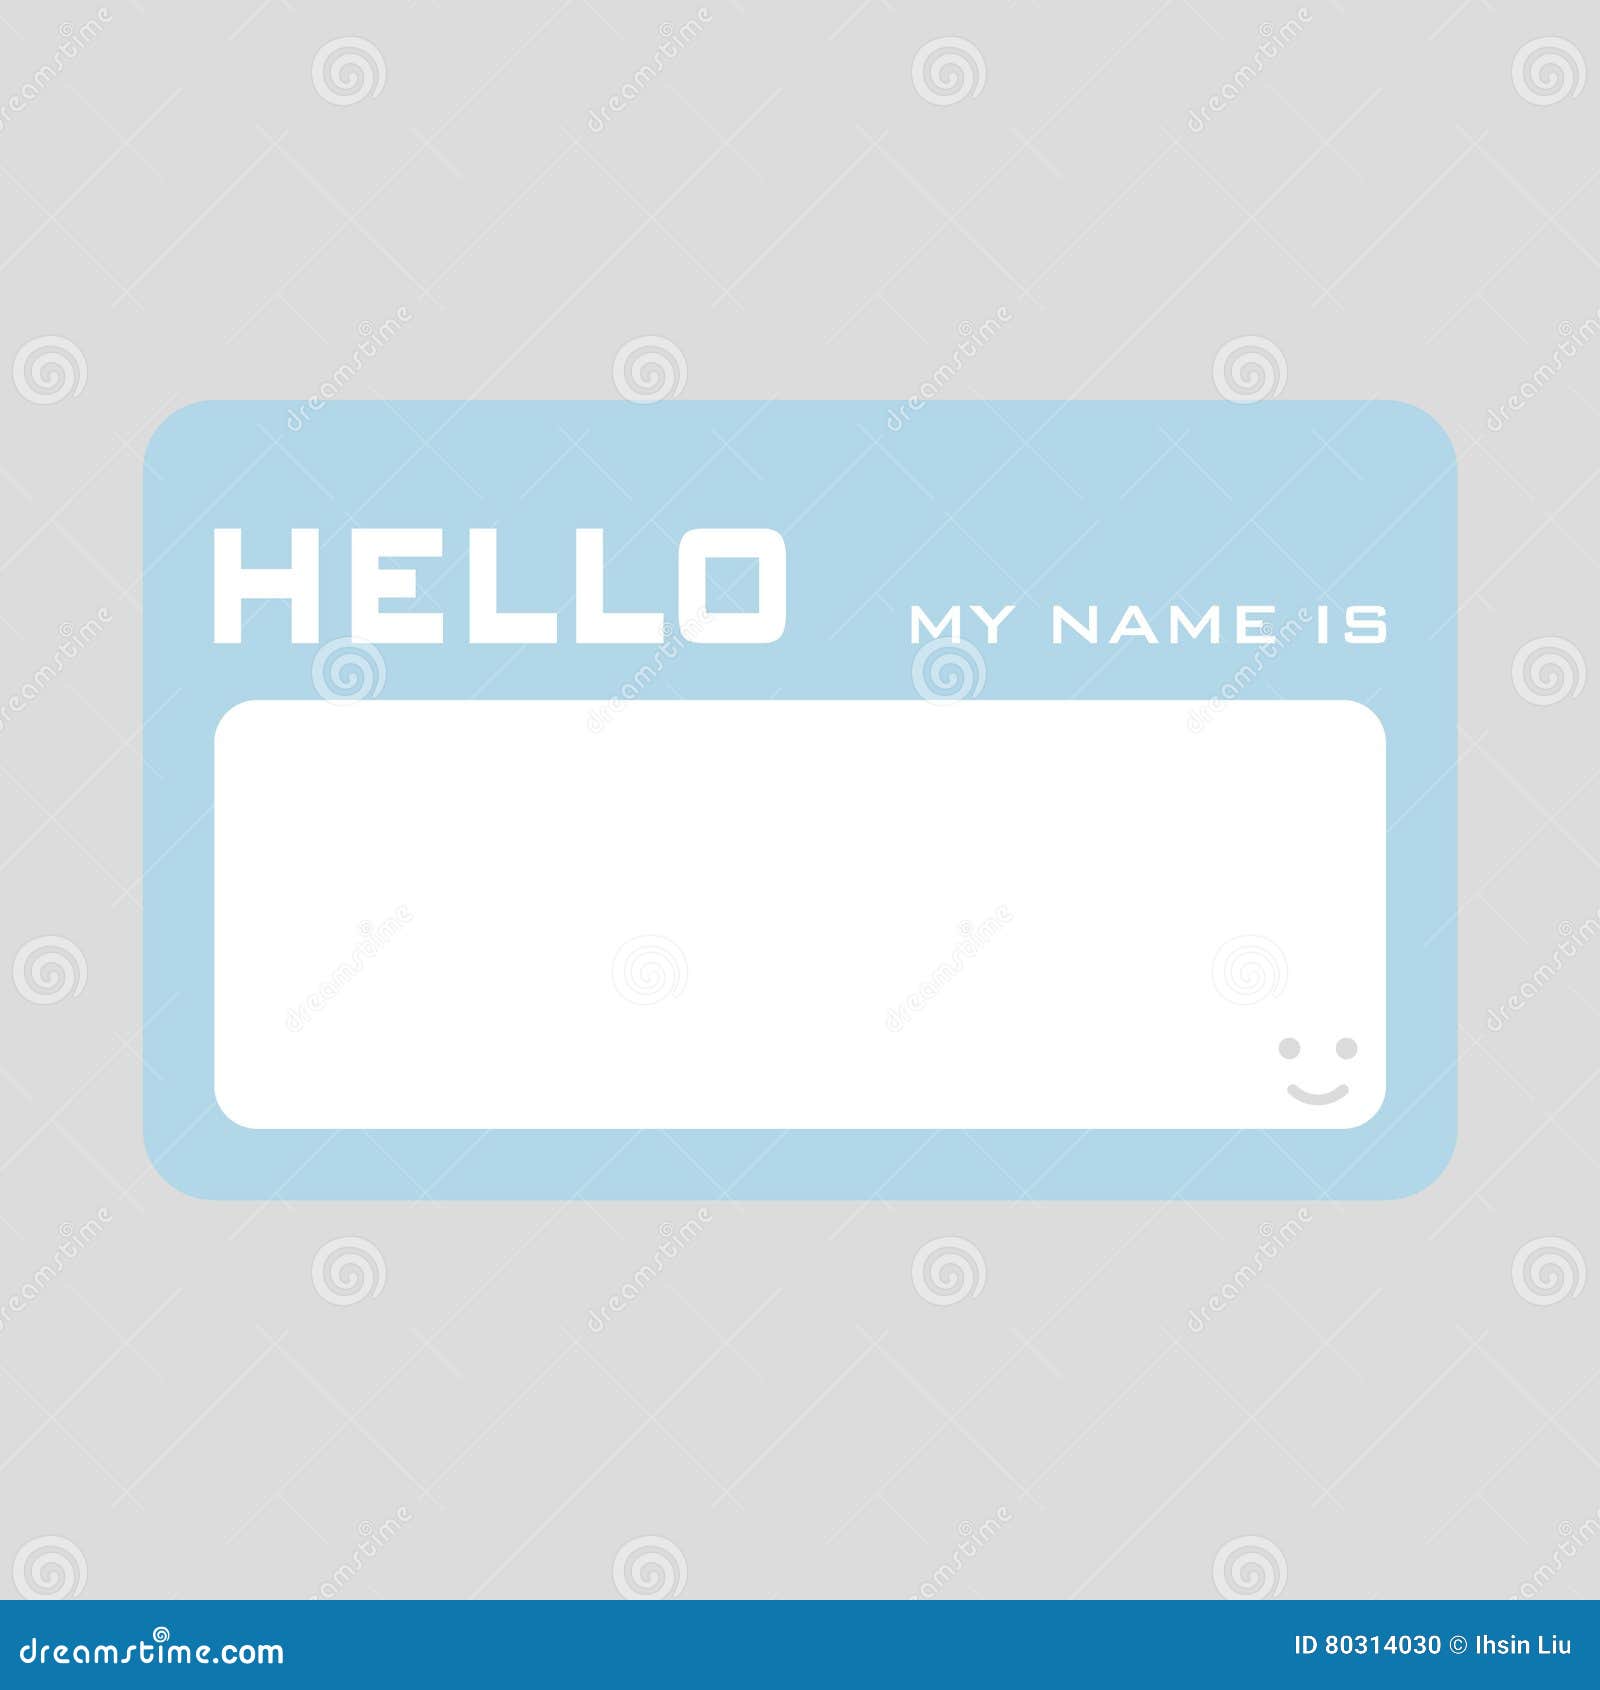 Hello My Name is Tag. stock illustration. Illustration of paper ...